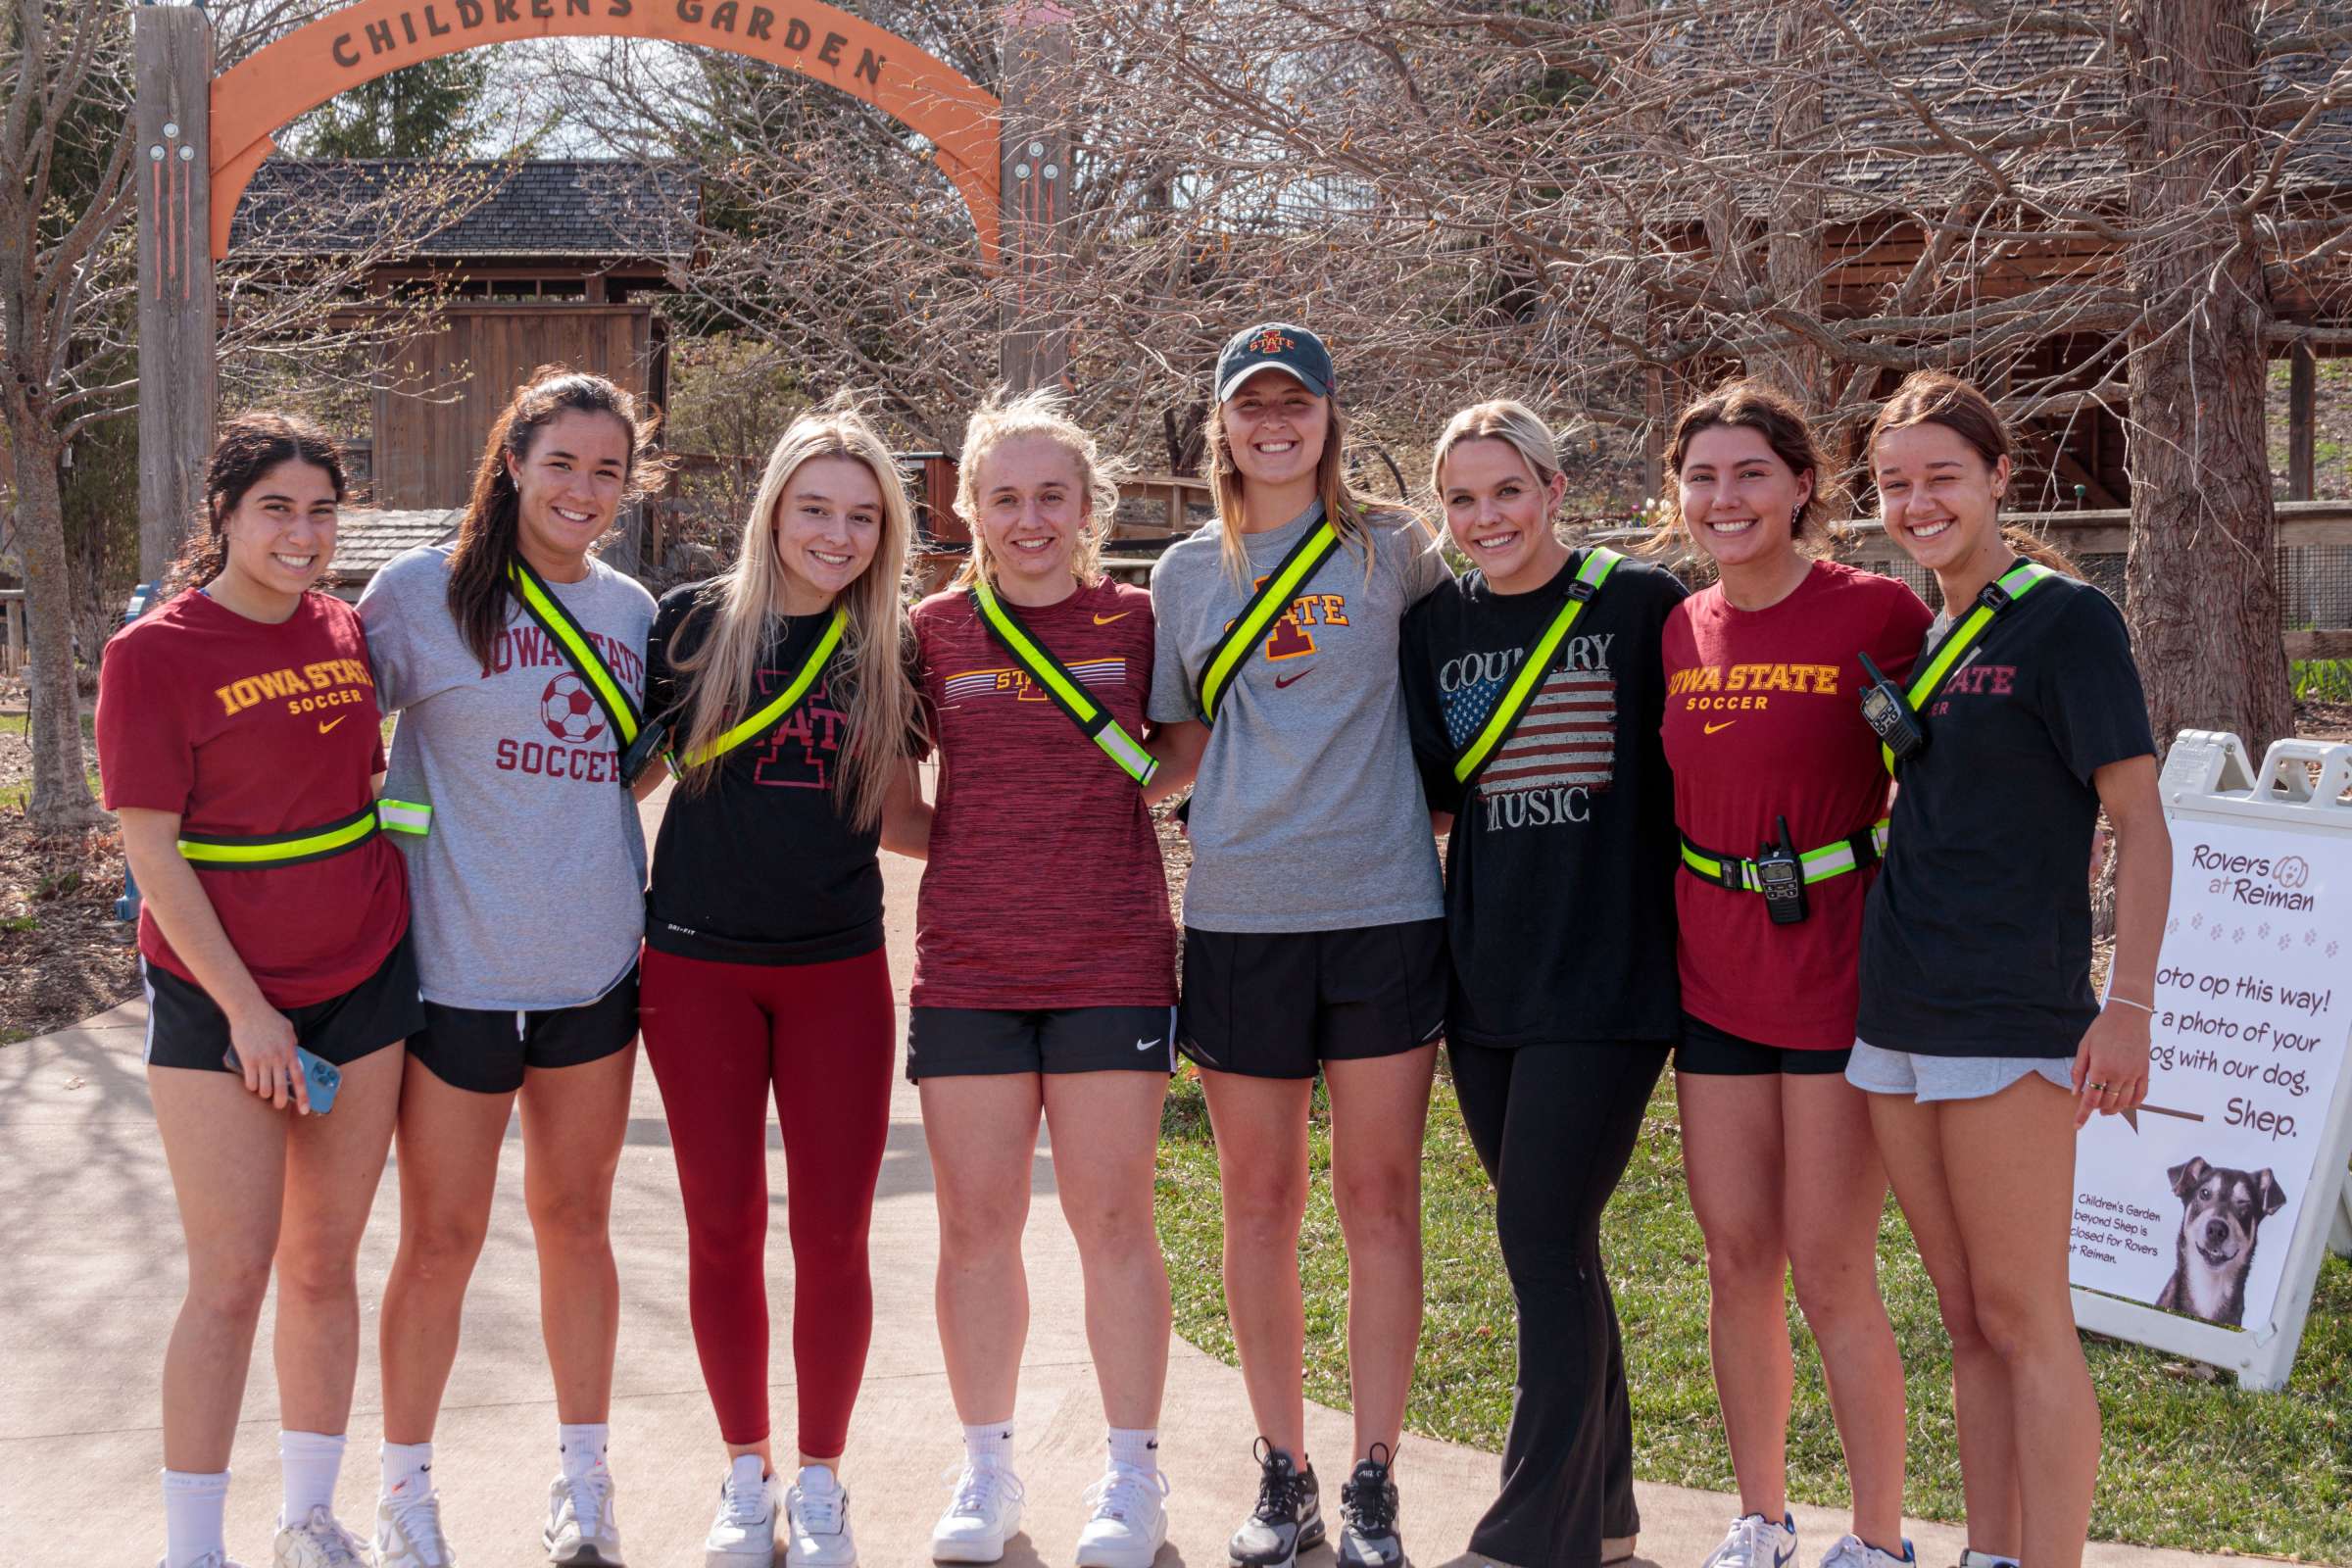 Eight Iowa State women's soccer players stand before the Children's Garden, smiling. These volunteers are excited to volunteer at Rovers at Reiman.